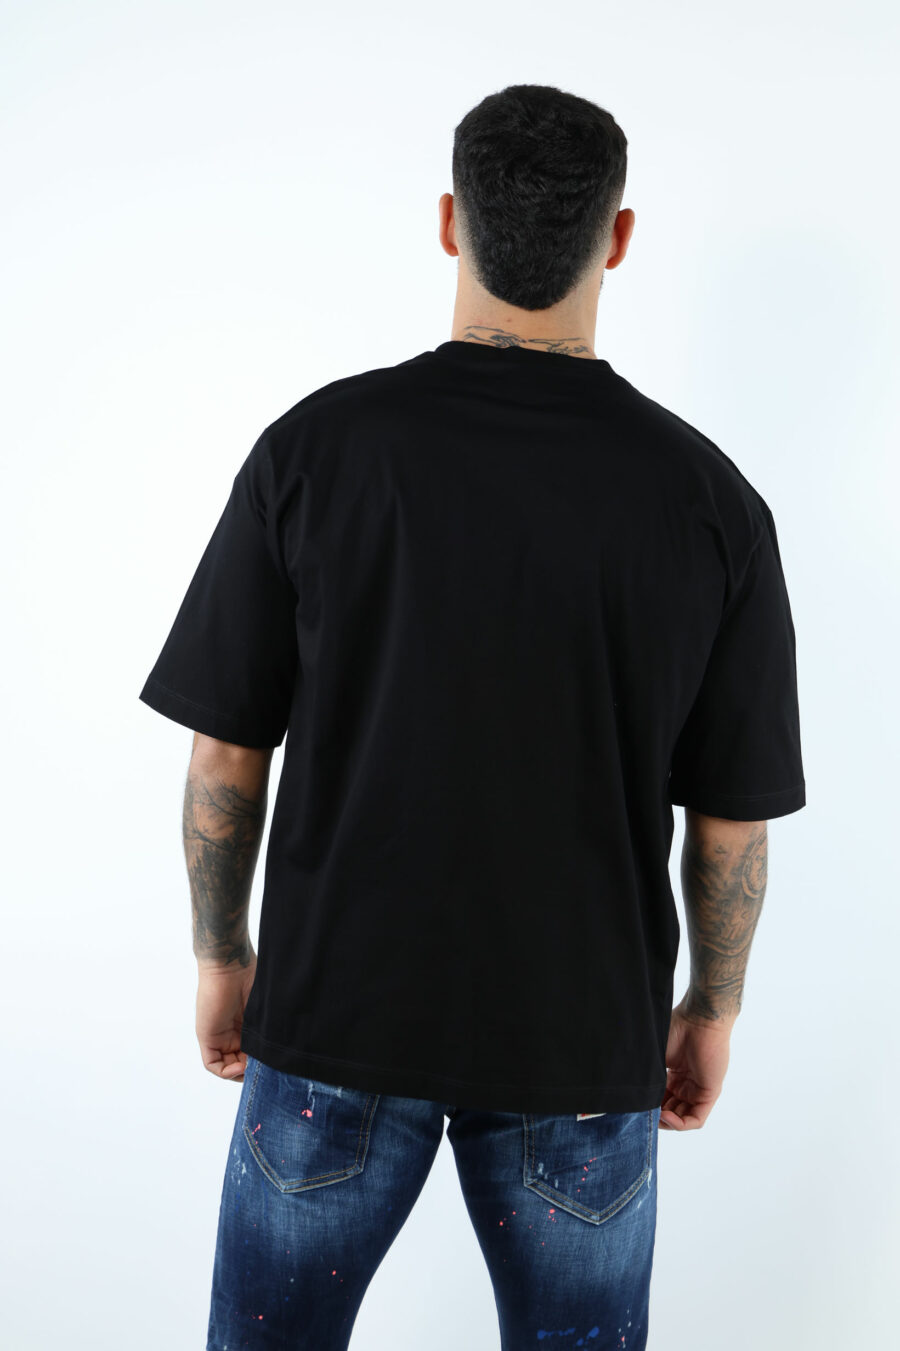 Black oversize T-shirt with neon green blurred "icon" maxilogo - 106934